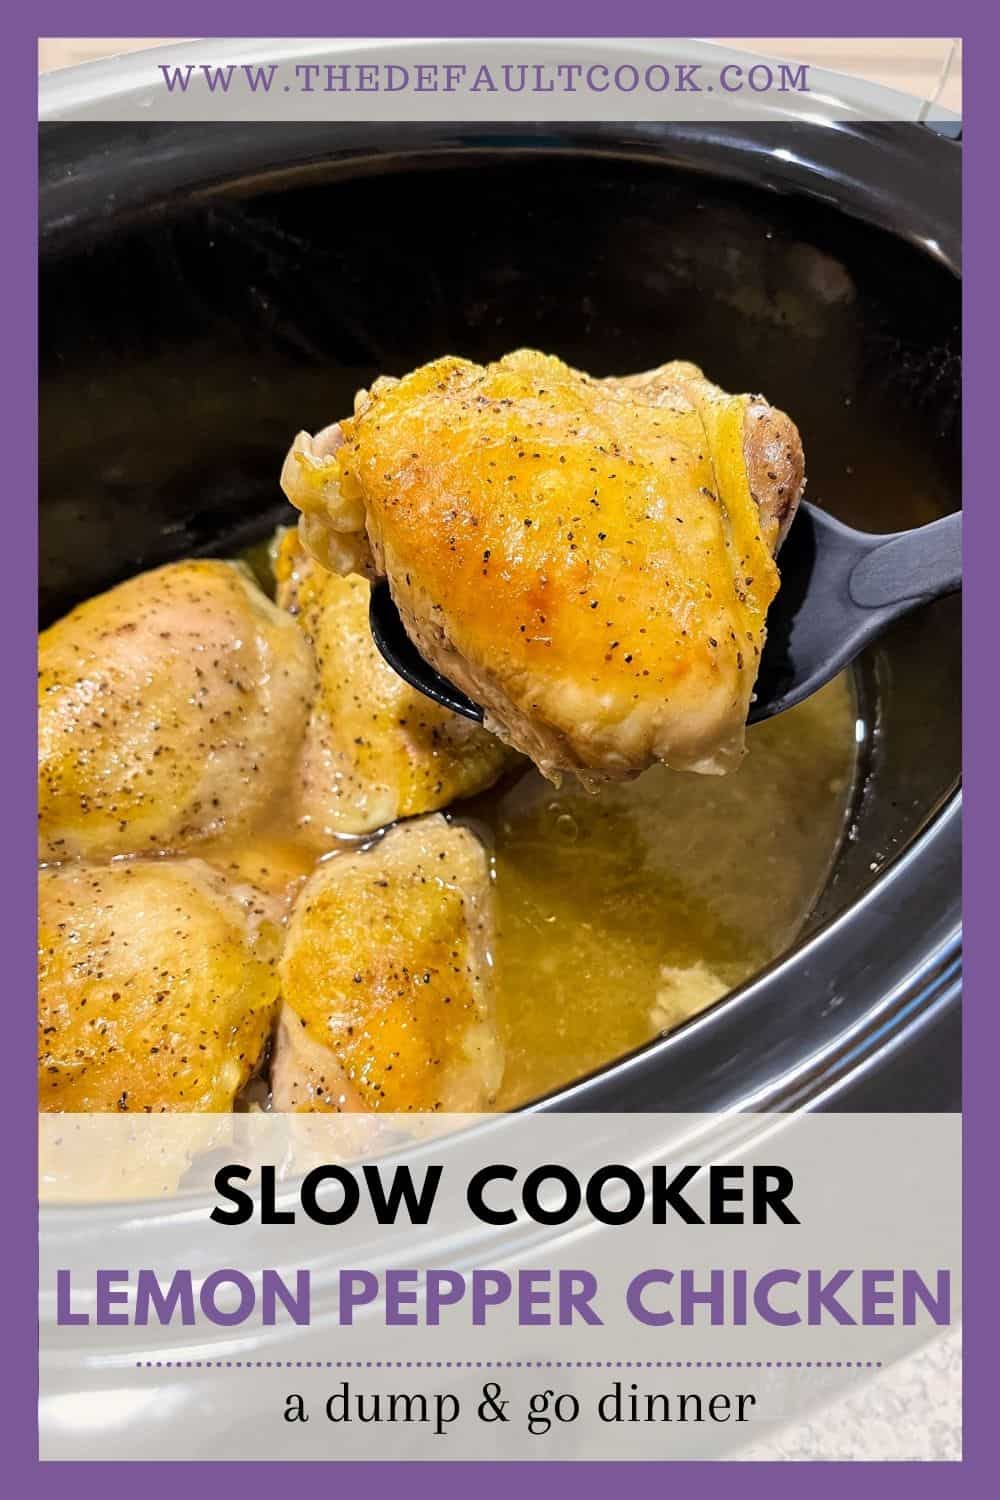 A slow cooker with finished lemon pepper chicken thighs, with one being lifted out on a serving spoon.